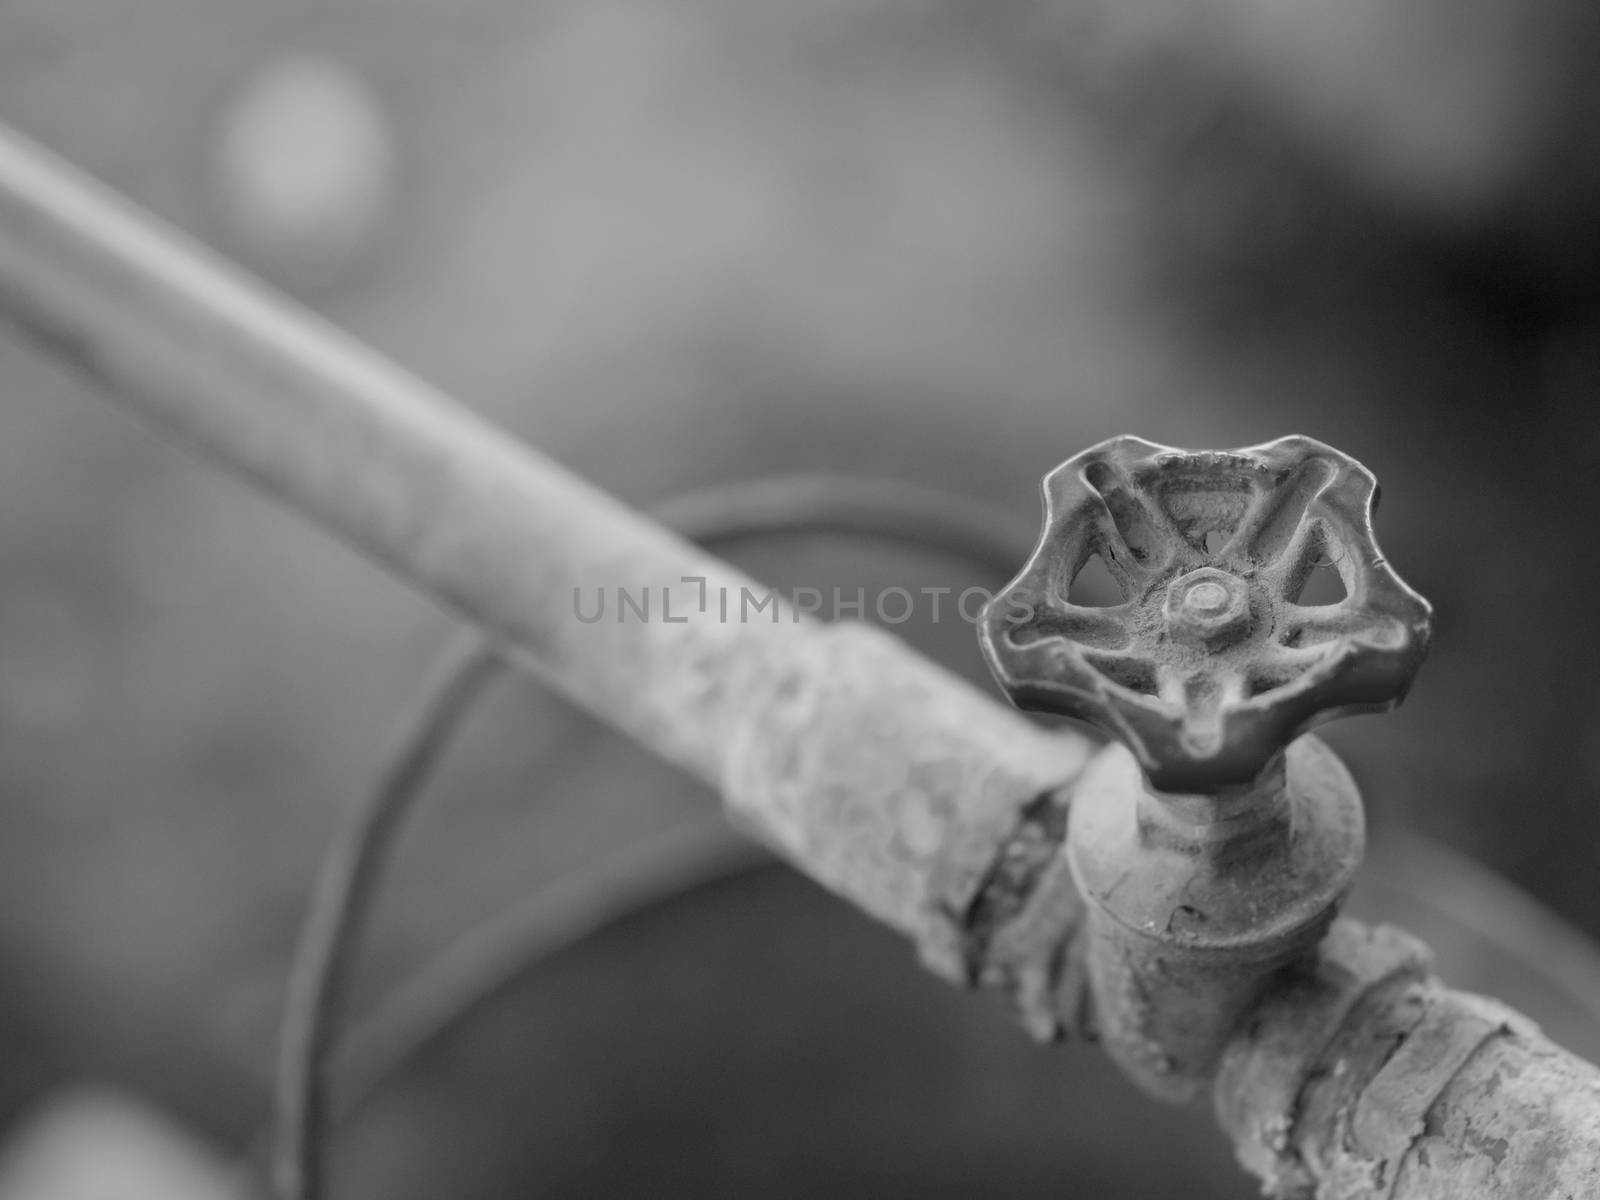 CLOSE-UP SHOT OF METAL TAP by PrettyTG